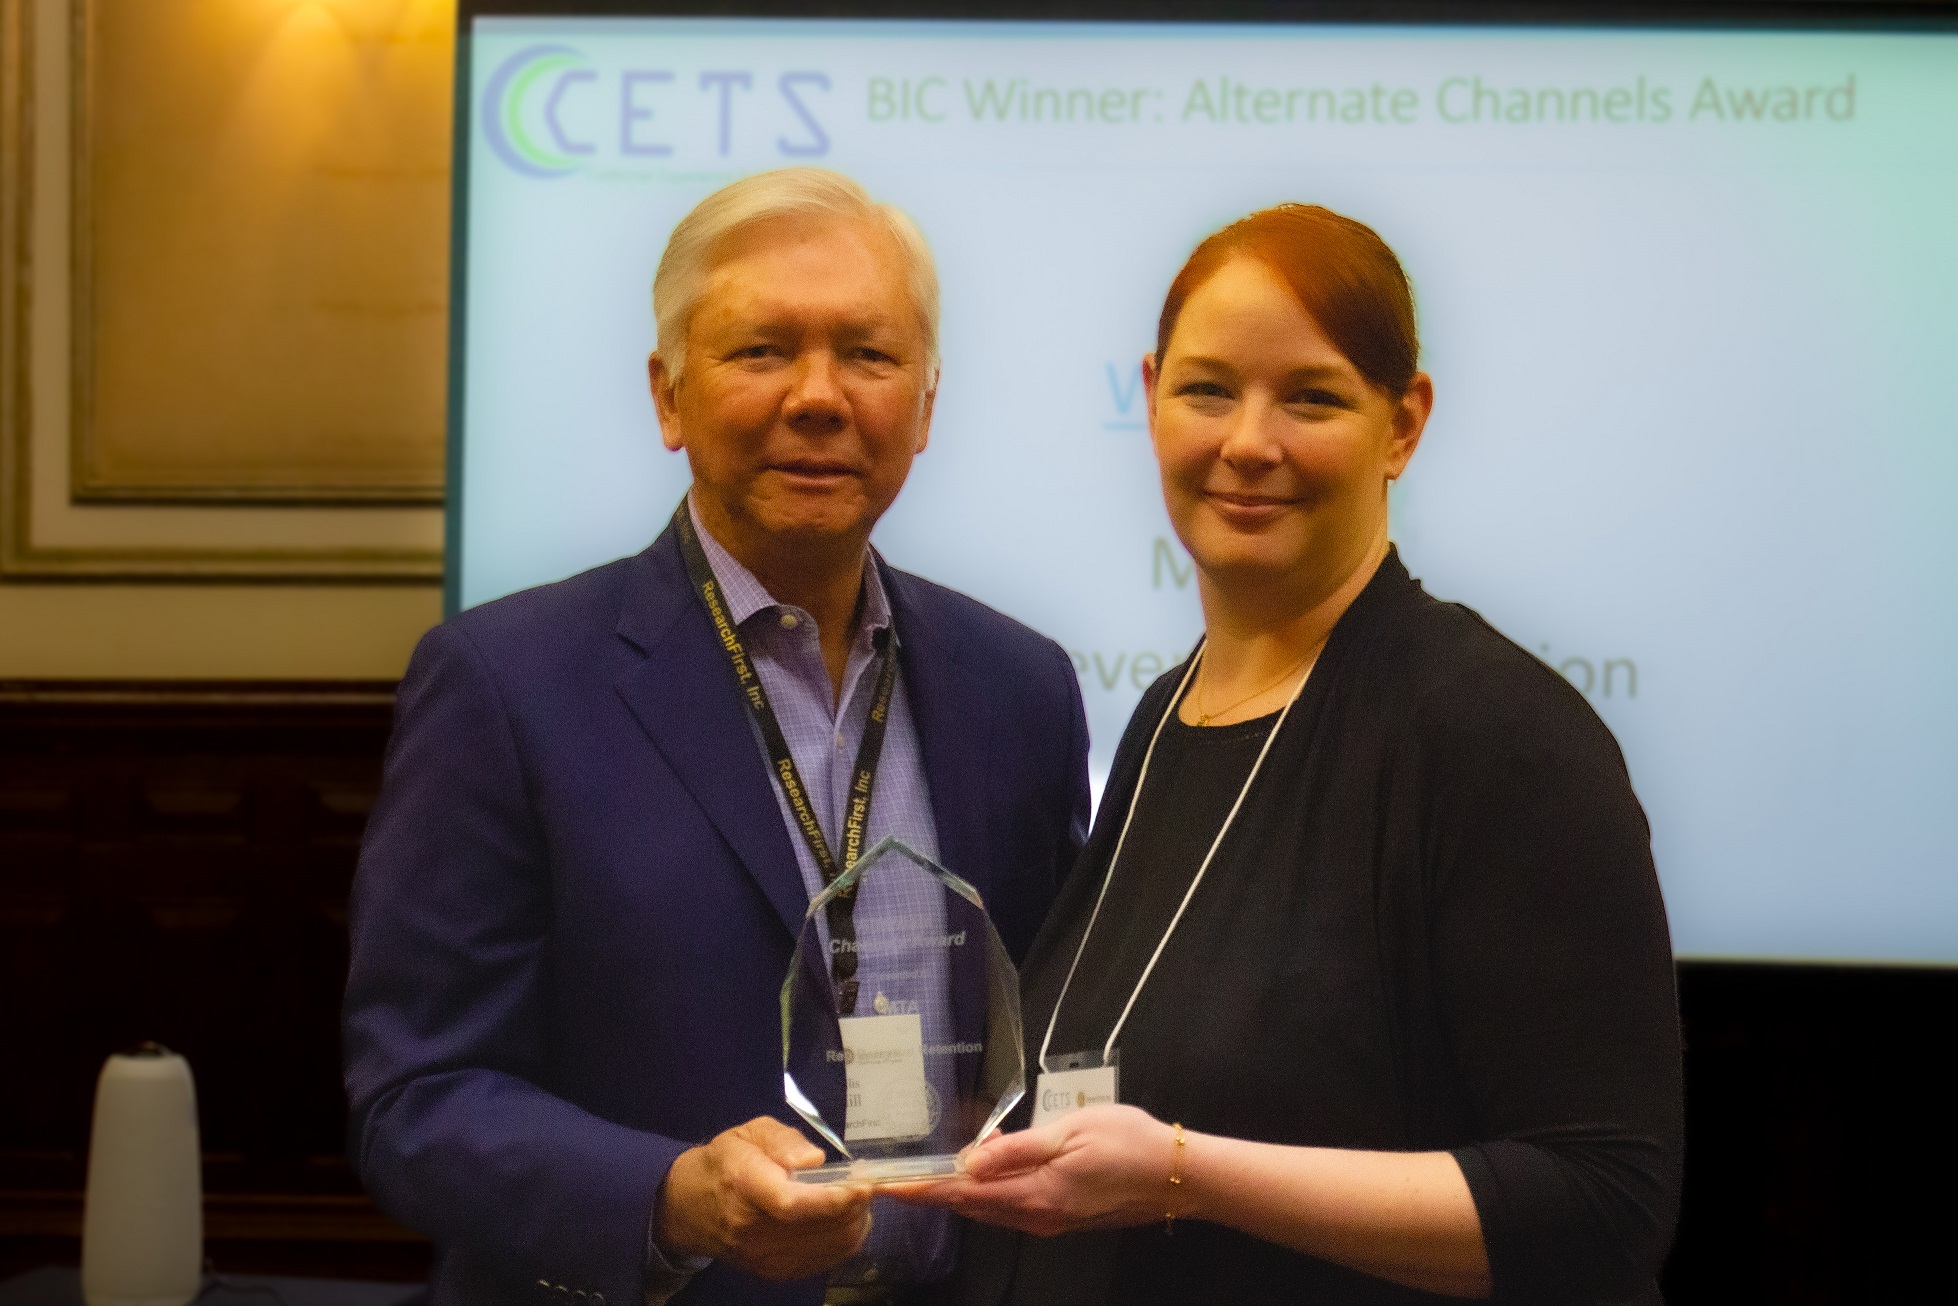 Jenna Deason, Sales Trainer at MTA (right) accepts the Alternate Channels Award from Ellis Hill, President of ResearchFirst (left).